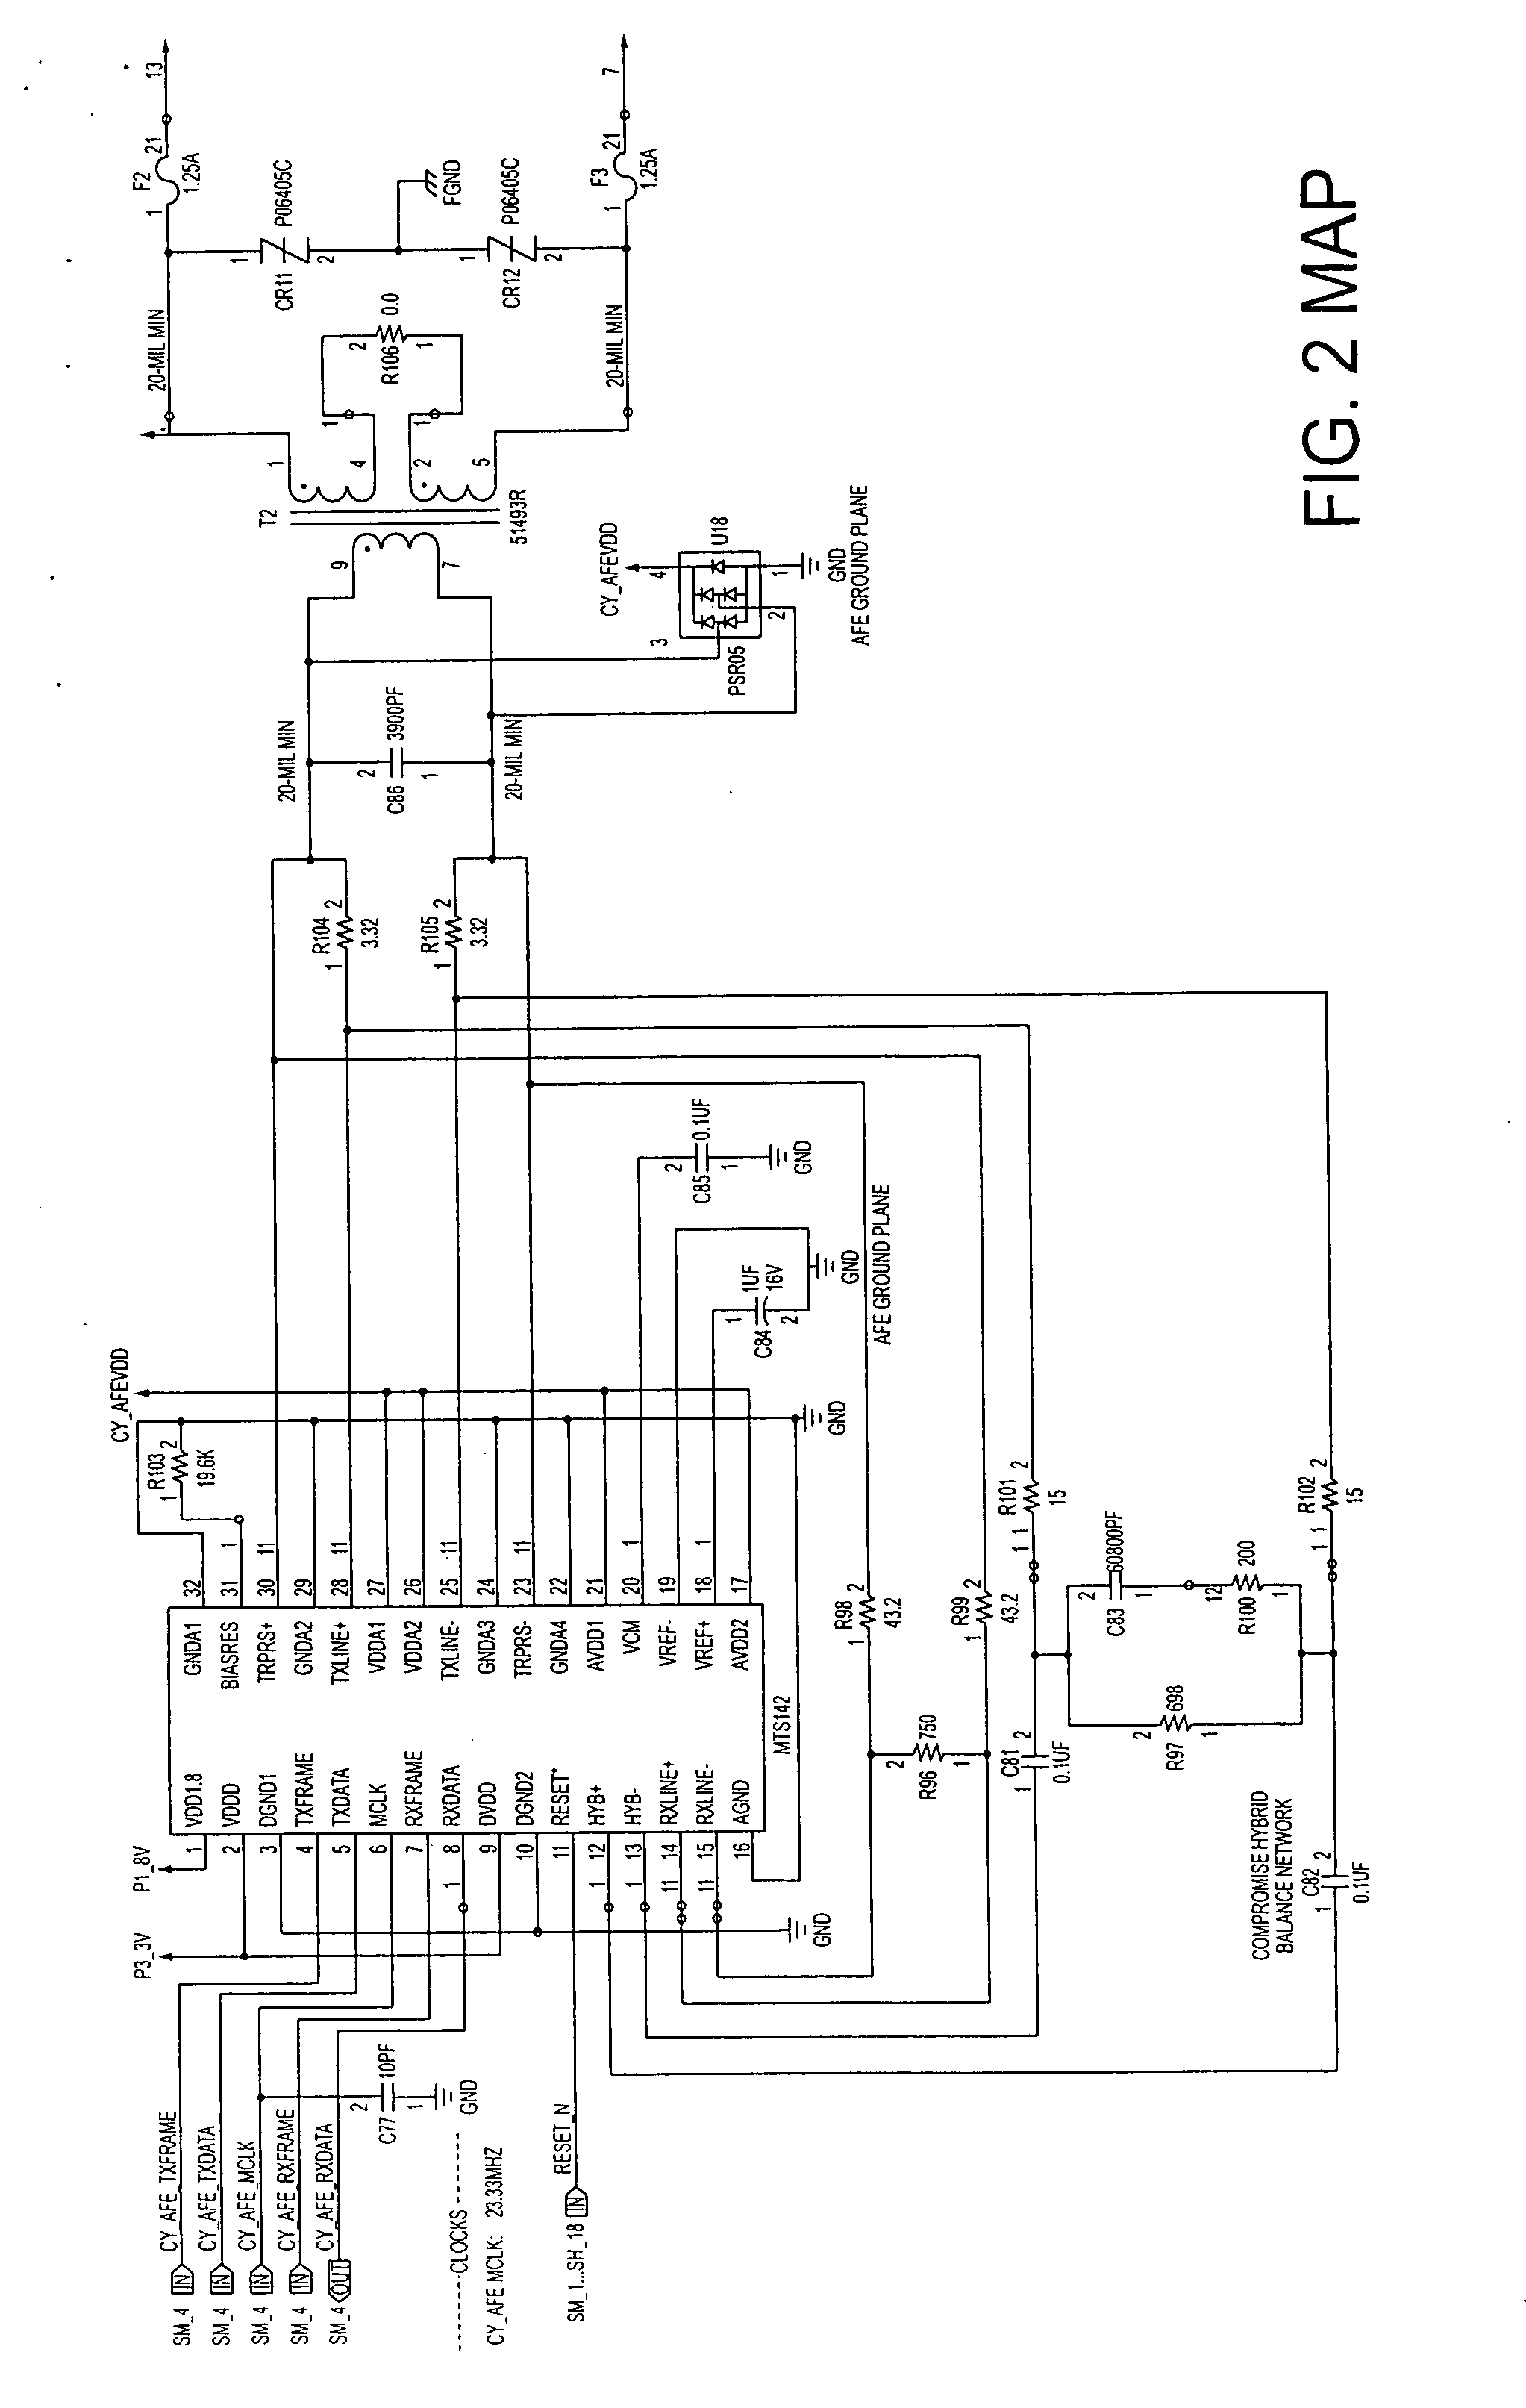 Method for extending Ethernet over twisted pair conductors and to the telephone network and plug-in apparatus for same employing standard mechanics